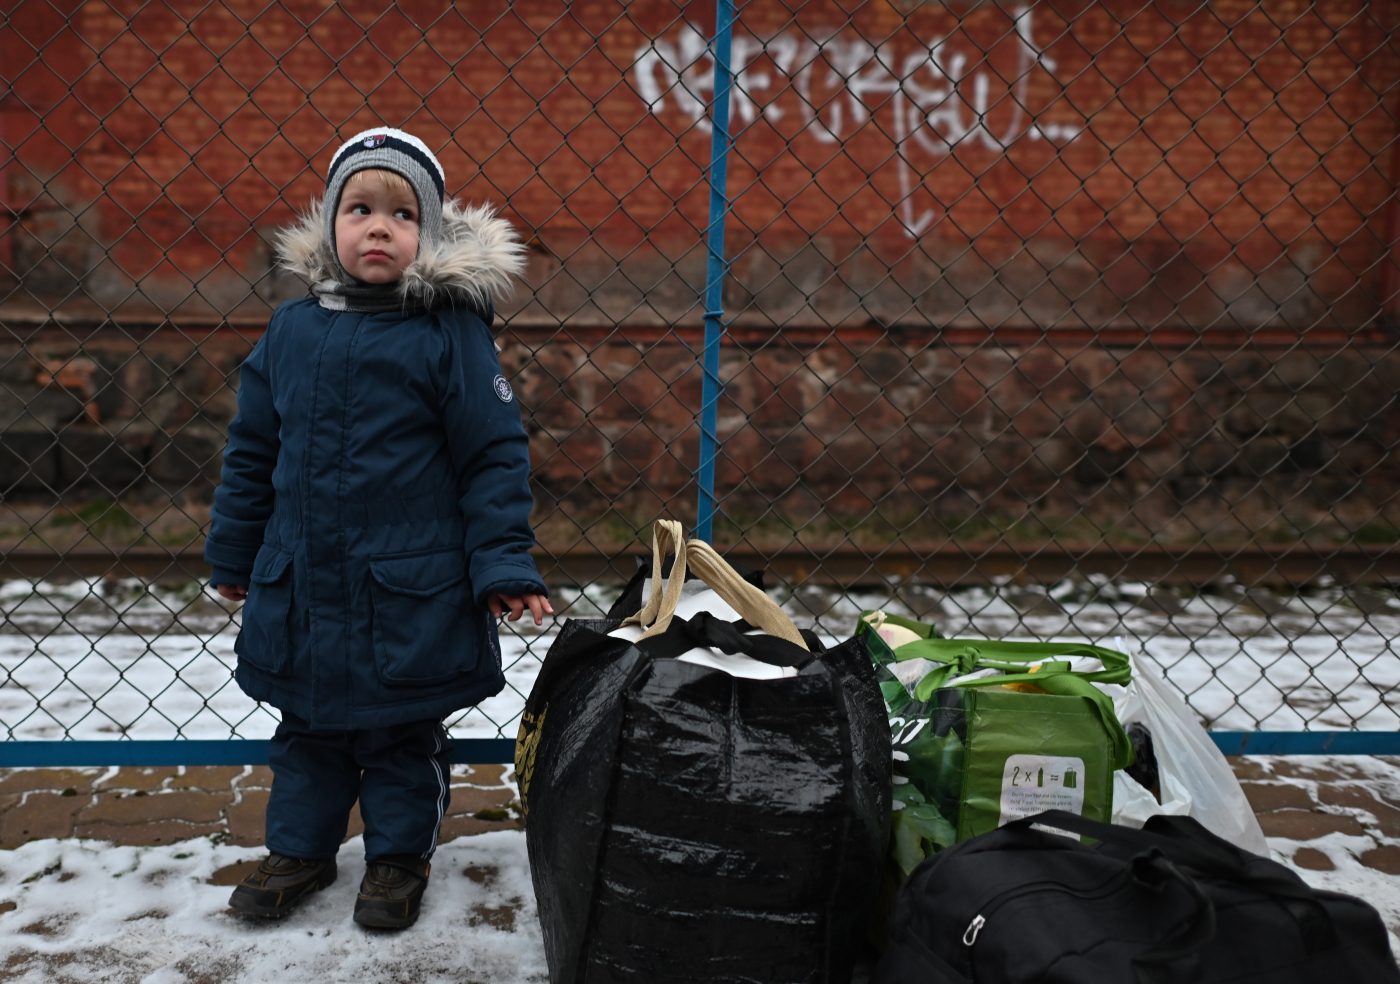 Photo: Young boy waits for his mother as she takes out the luggage from the train from Kherson to Khmelnytskyi at Khmelnytskyi train station, December 19, 2022, in Khmelnytskyi, Khmelnytskyi Oblast, Ukraine. Credit: Artur Widak/NurPhoto